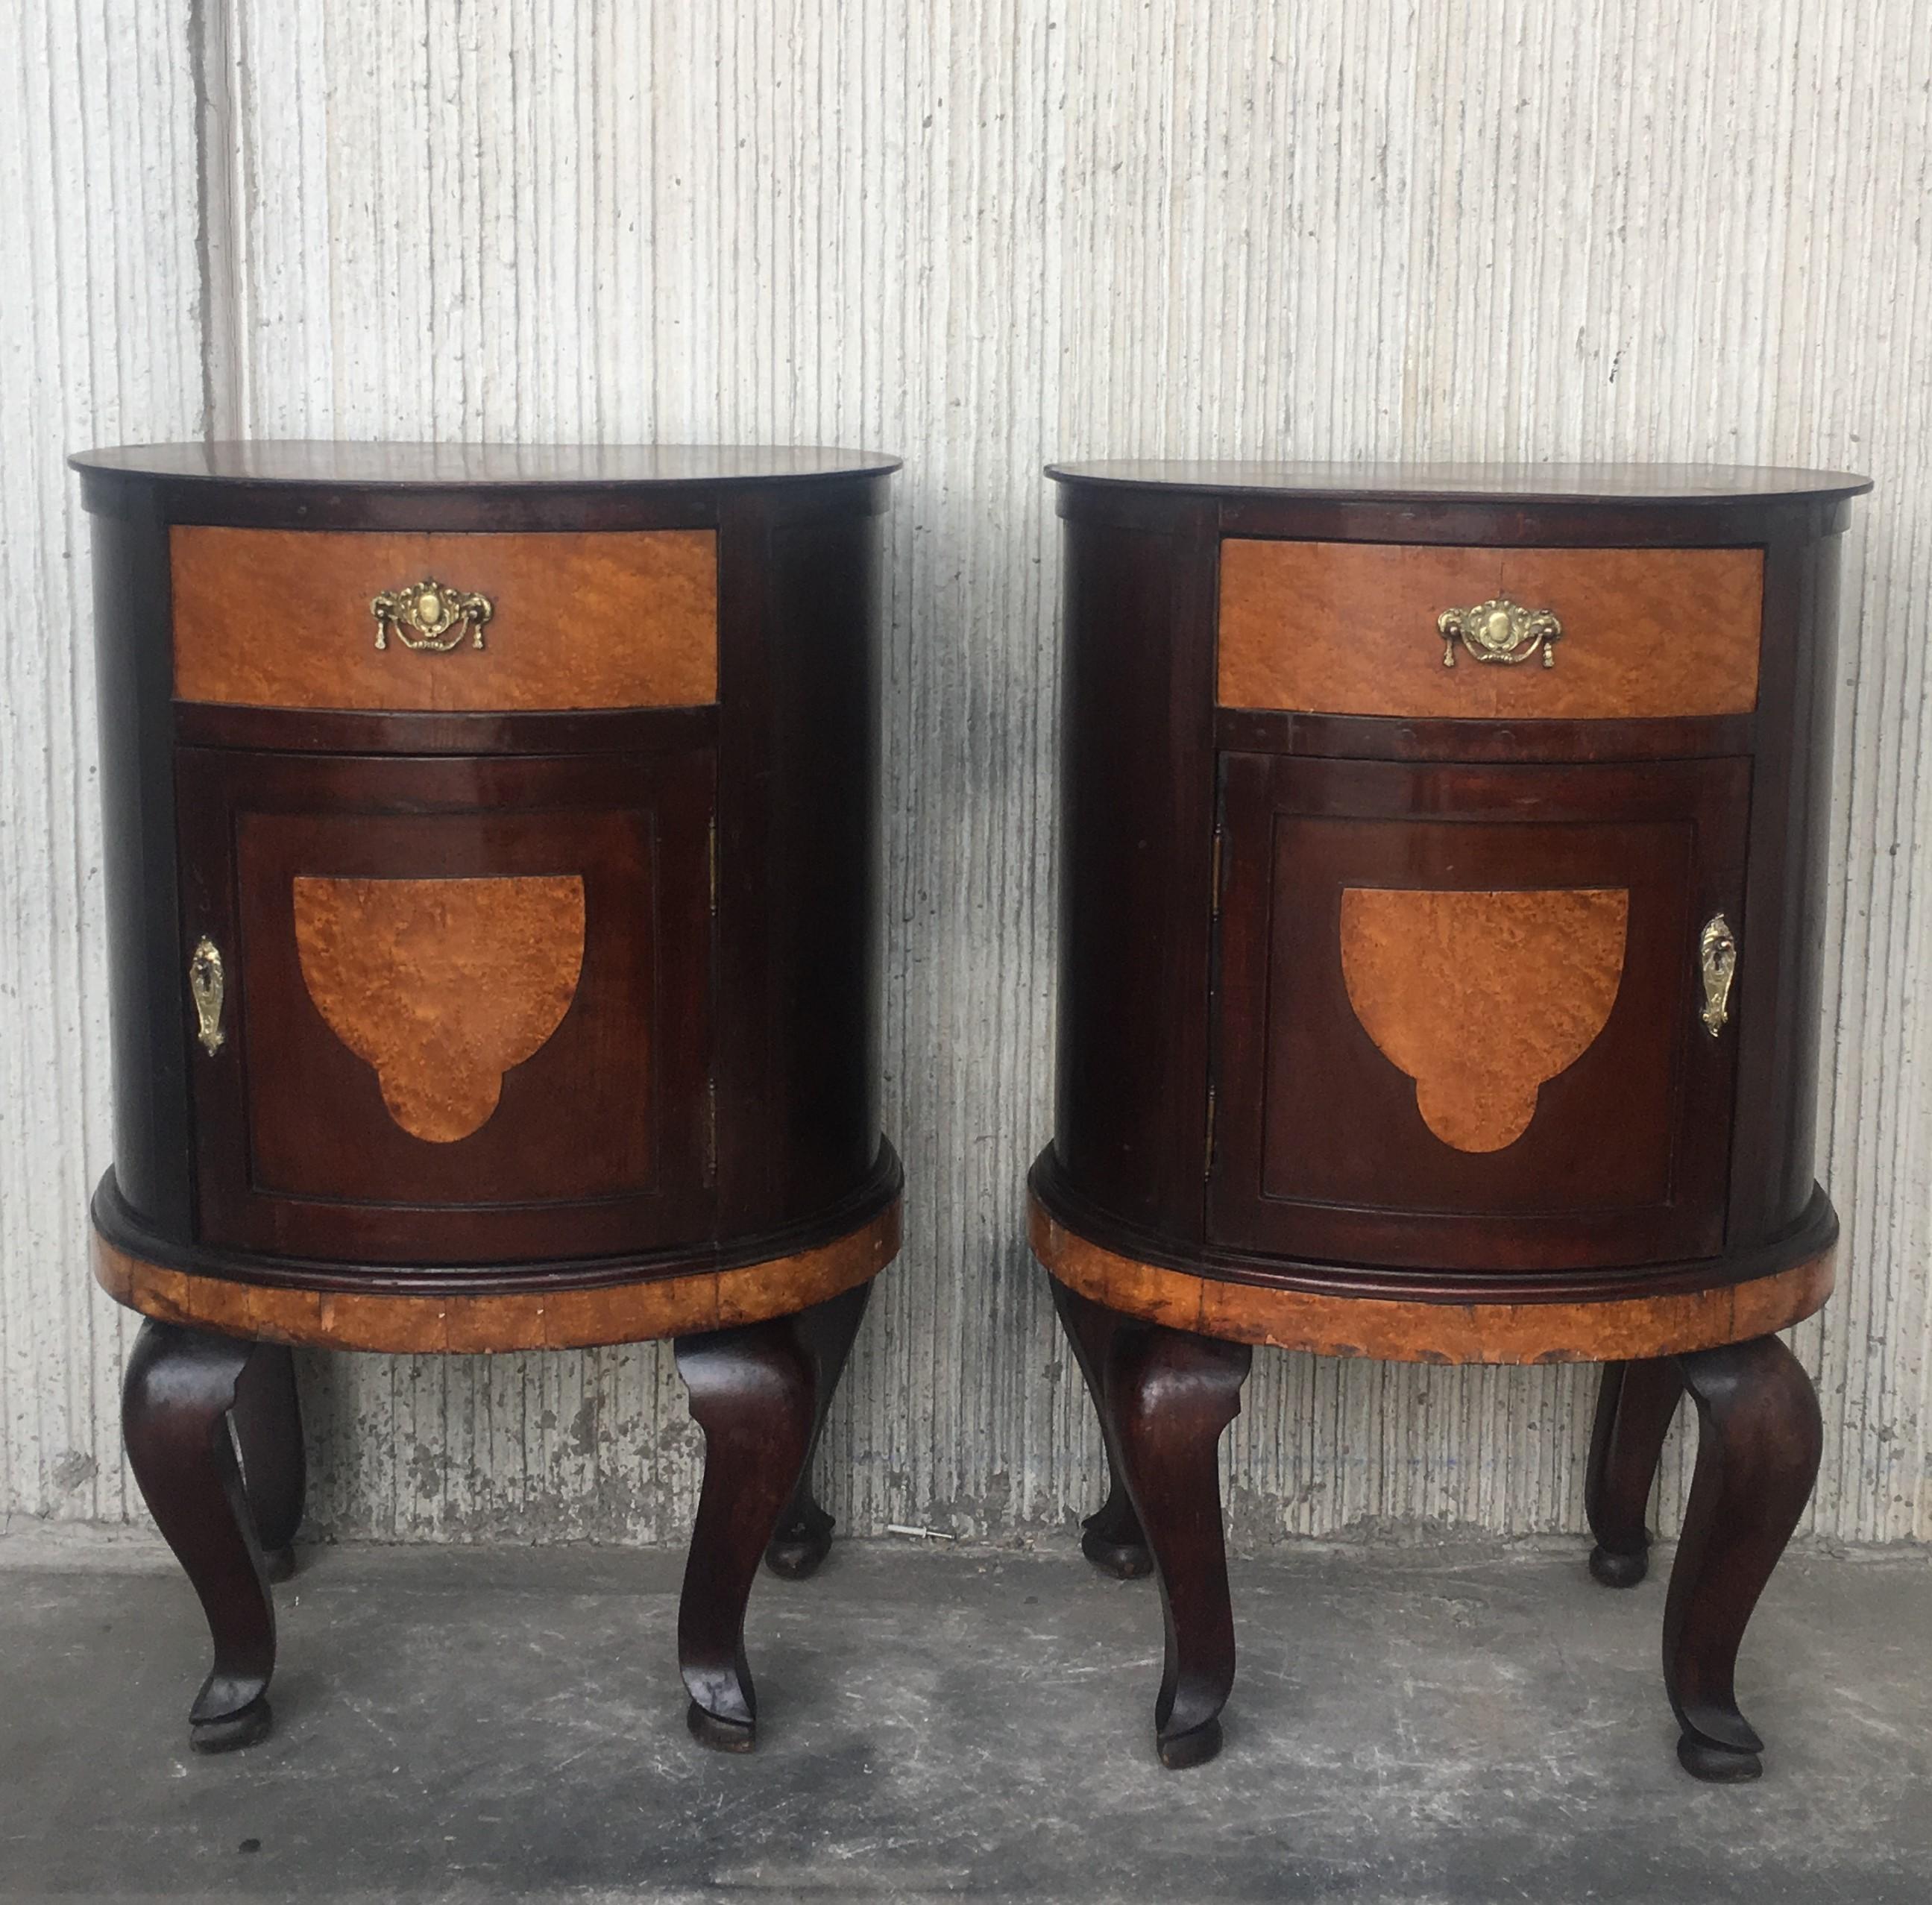 Pair of marquetry nightstands with metal crest one drawer and one compartment.
Originals handles and garniture.

Measures: Height to the table 30.75 in
Total height 39.75 in.
   